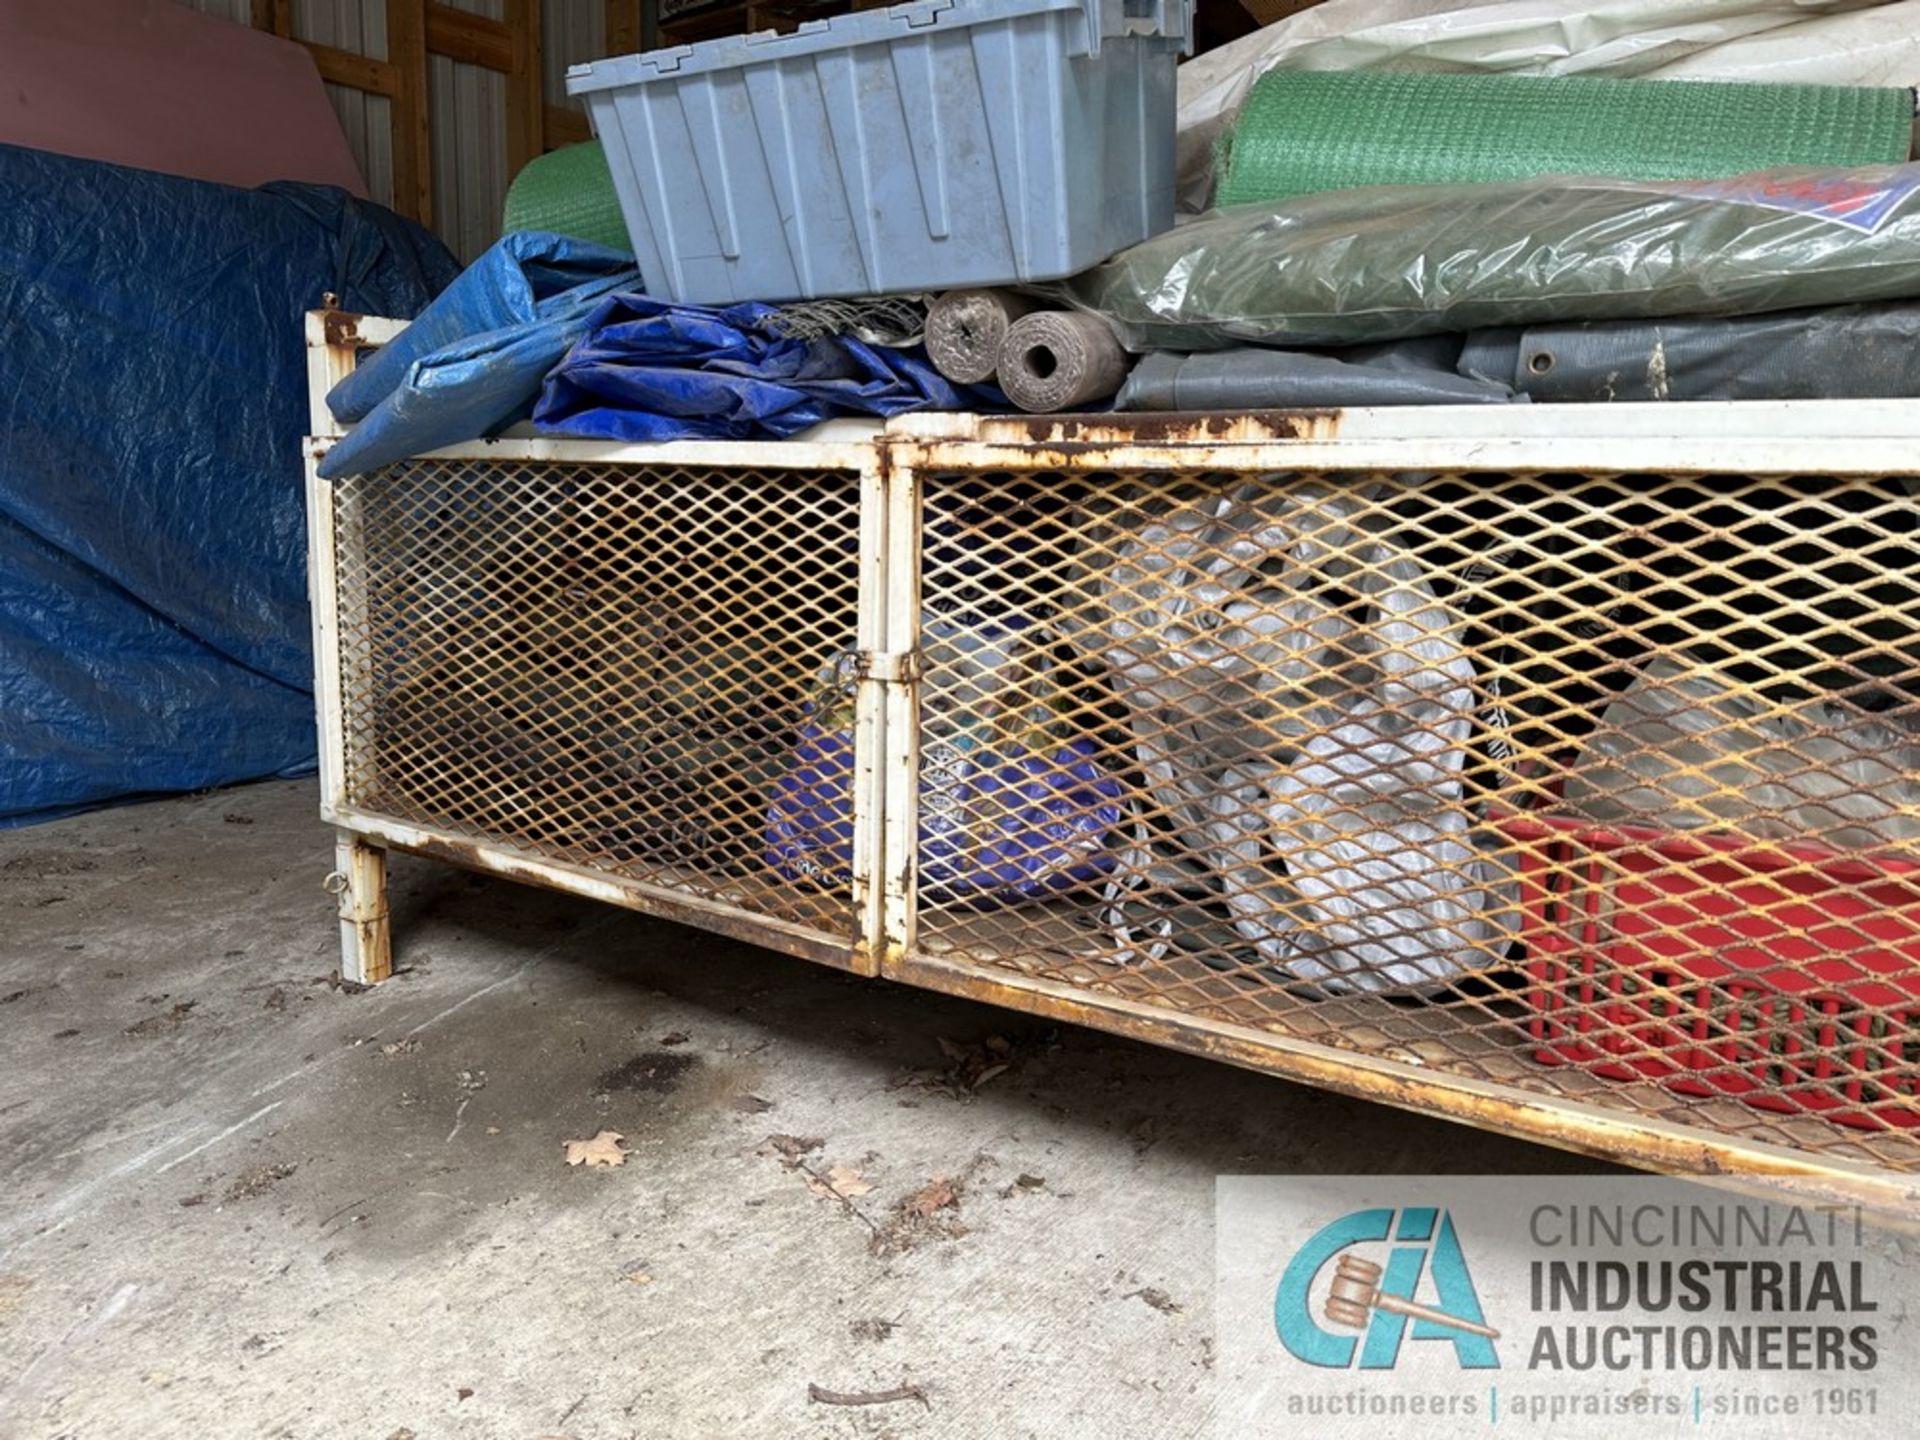 STEEL WIRE GRATED STORAGE BOX WITH MISCELLANEOUS TARPS *LOCATED IN SHED AT REAR OF BUILDING* - Image 3 of 6